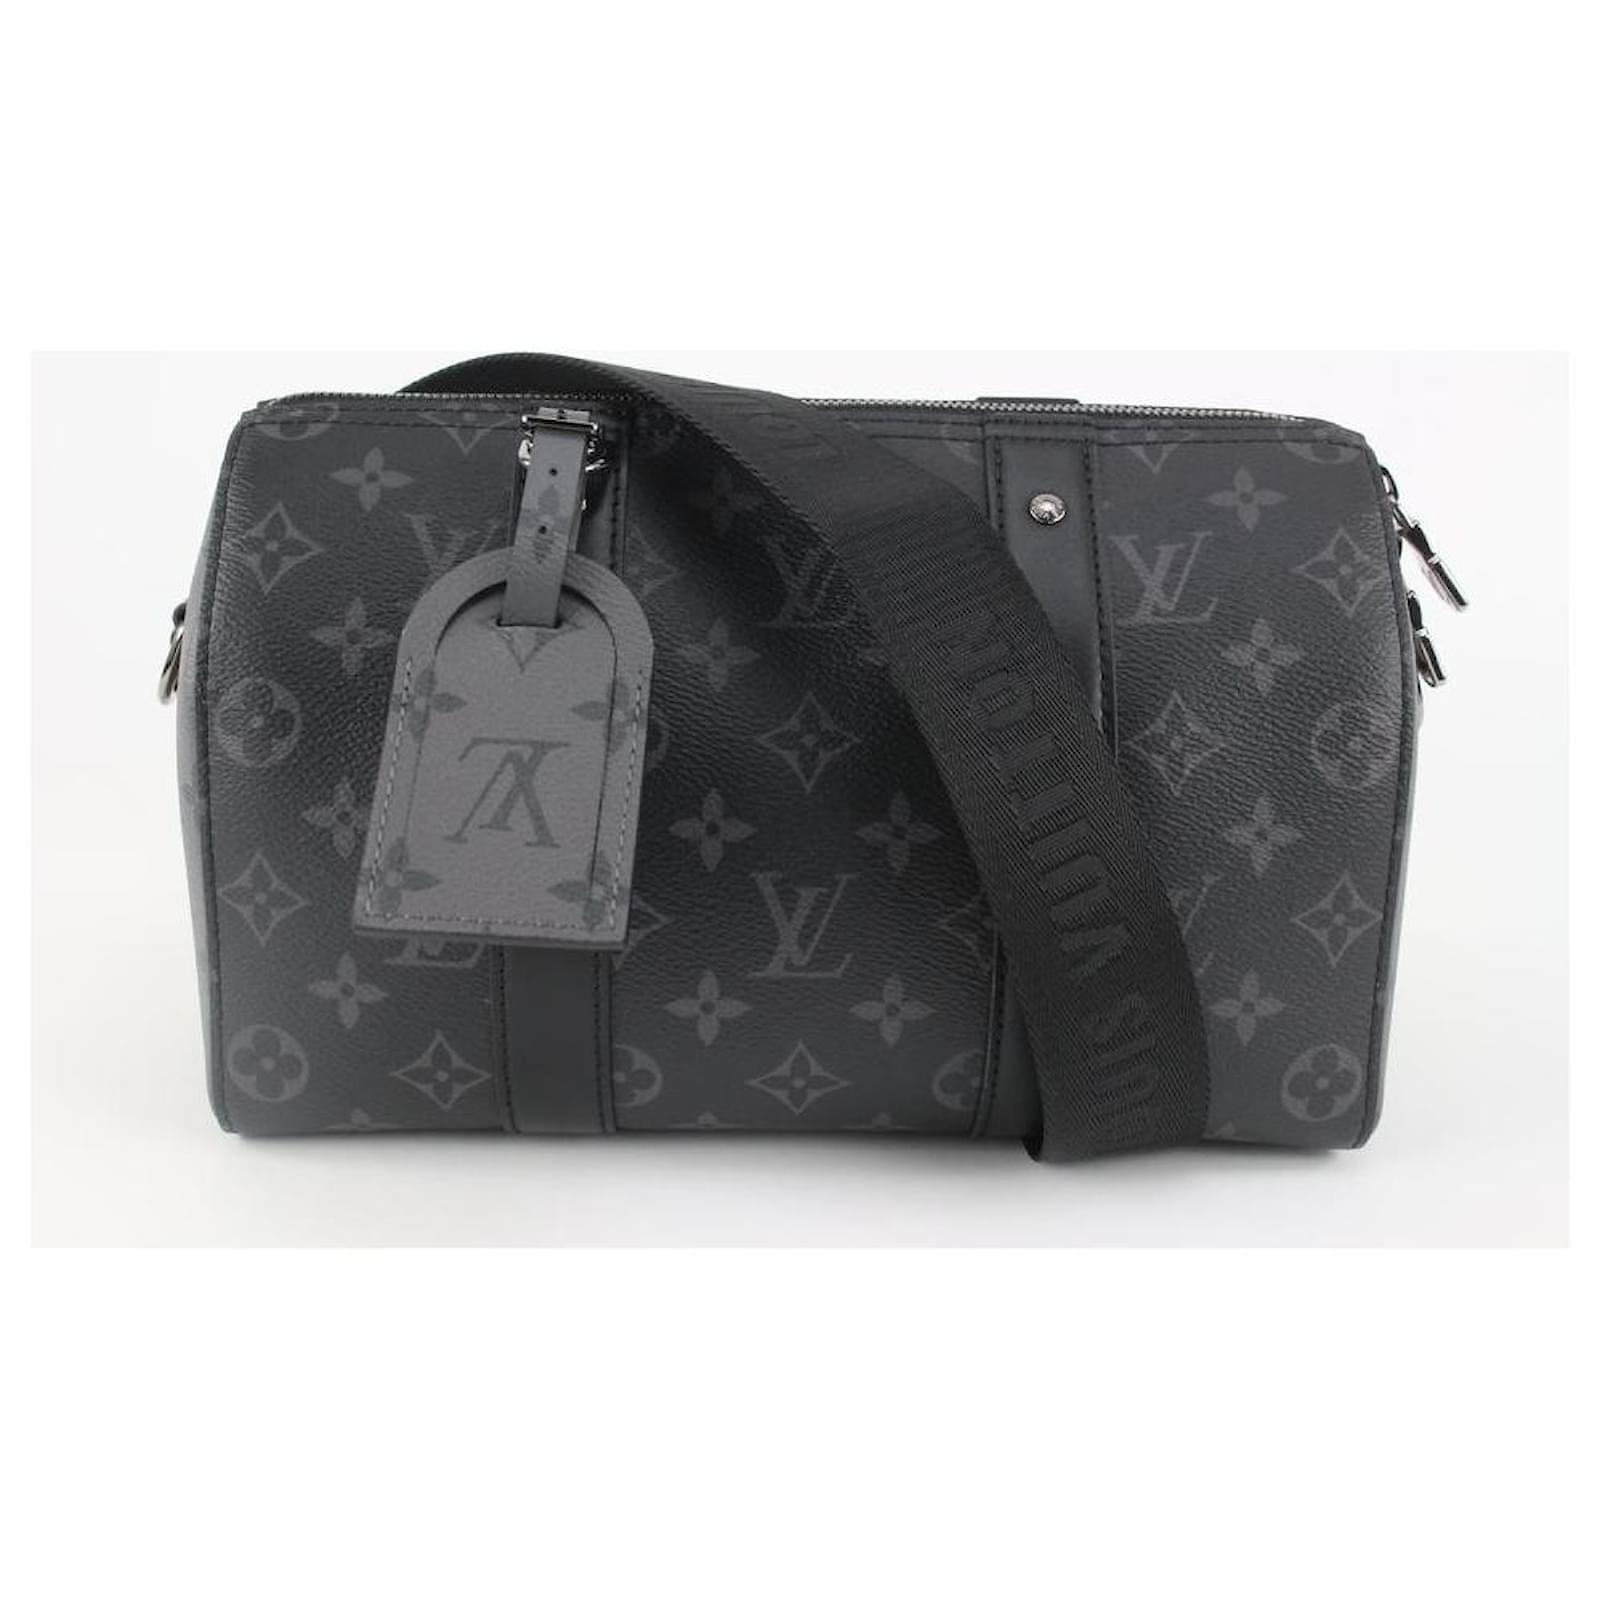 City Keepall Monogram Other - Bags